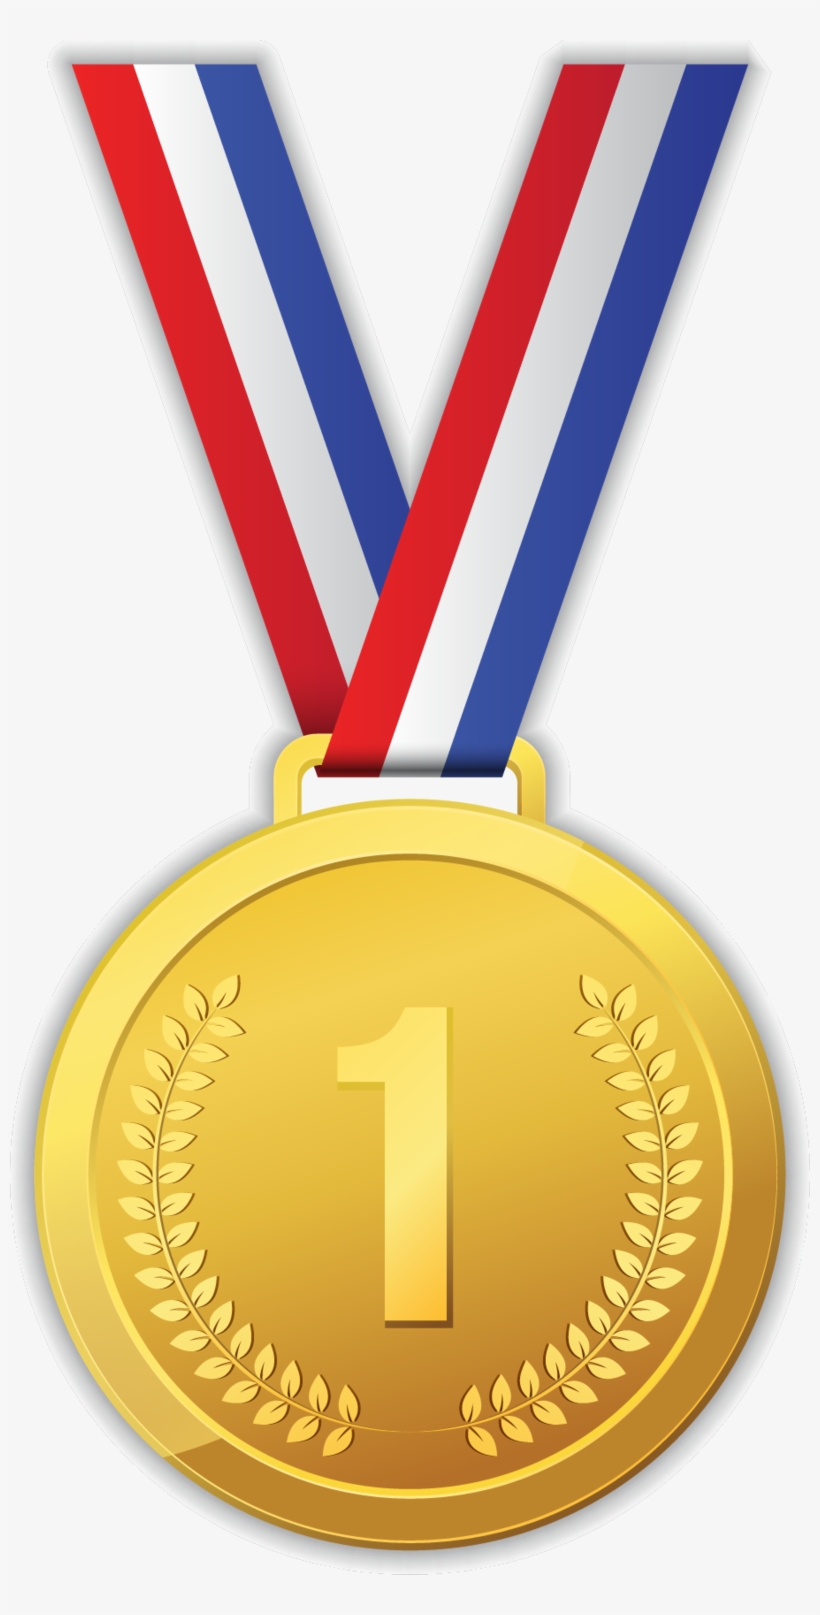 Gold Medal Png, Download Png Image With Transparent - Gold Medal Vector Png, transparent png #8890058